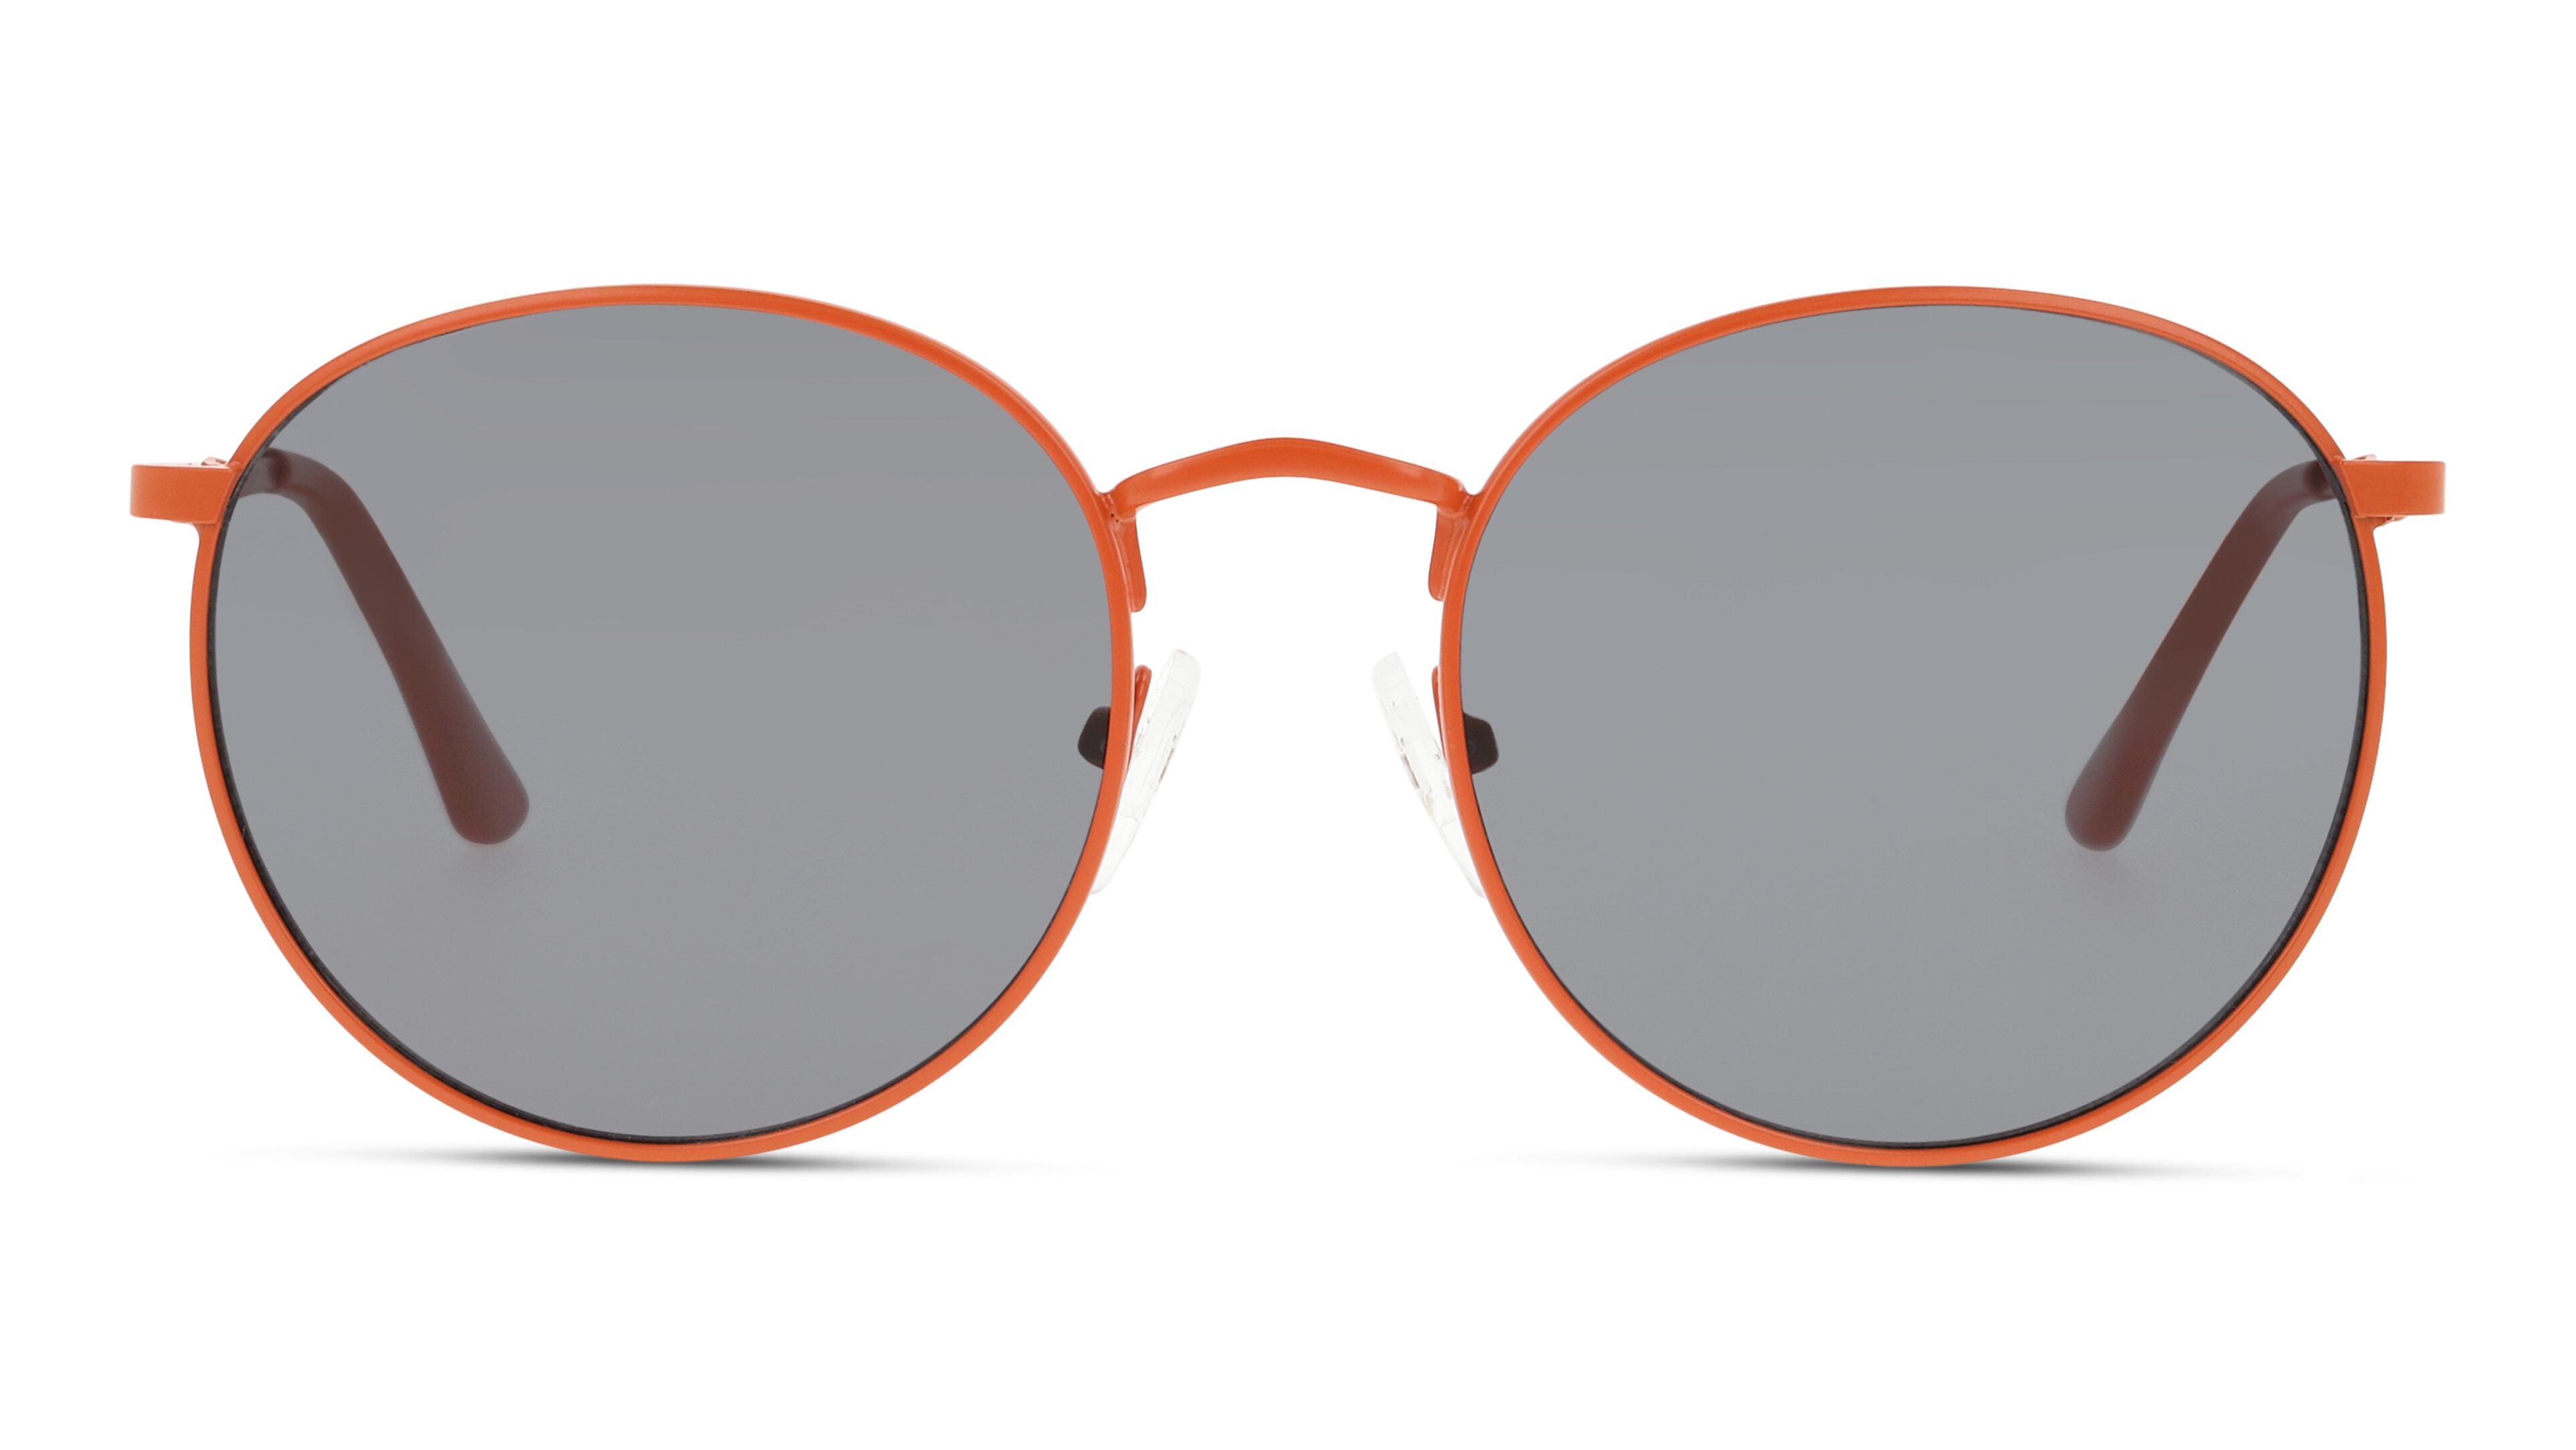 [products.image.front] Seen SNSU0015 OOG0 Sonnenbrille